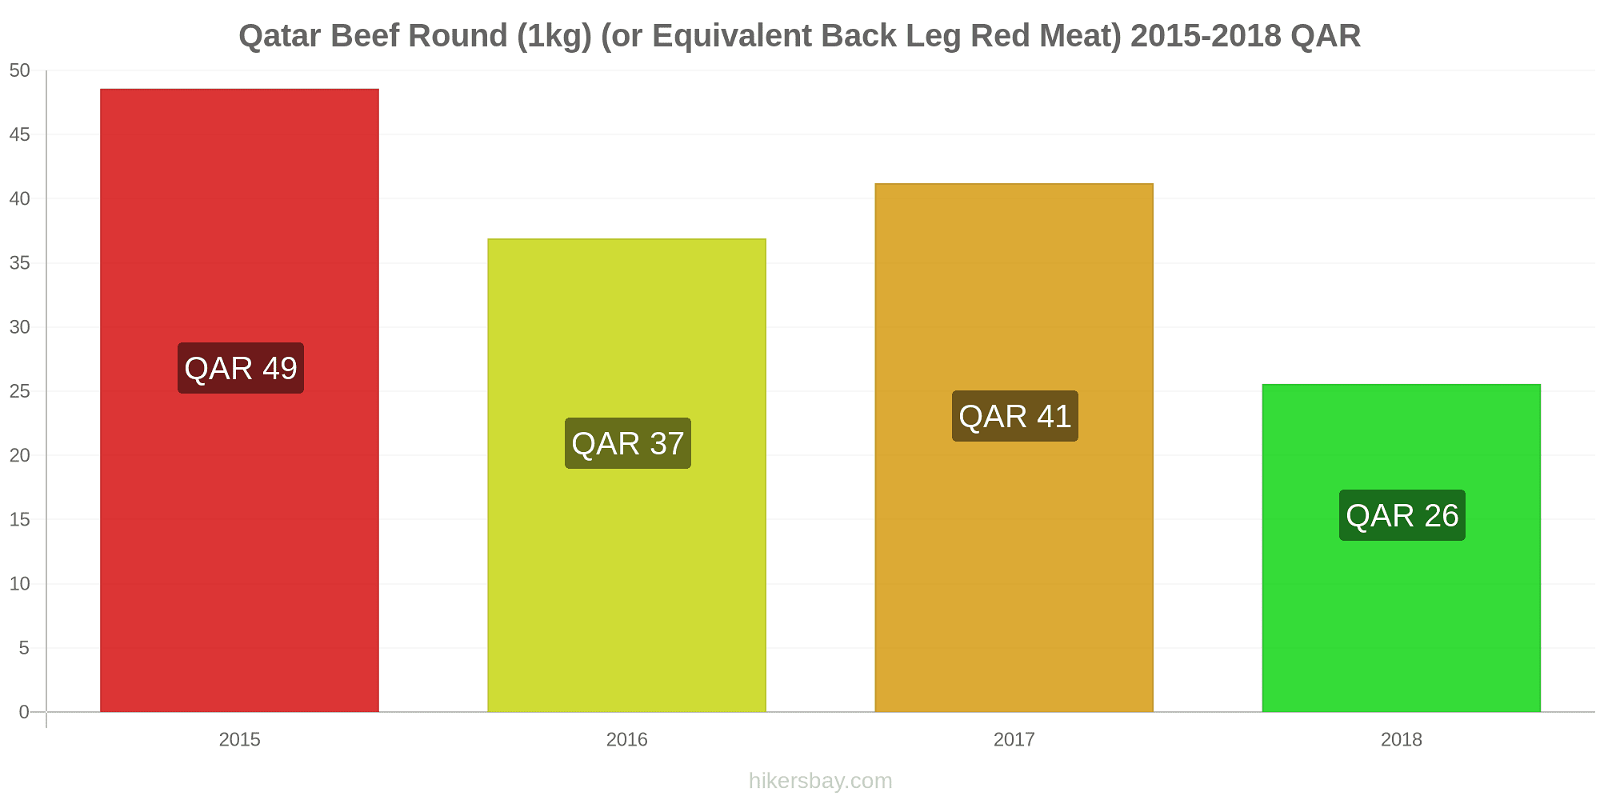 Qatar price changes Beef (1kg) (or similar red meat) hikersbay.com